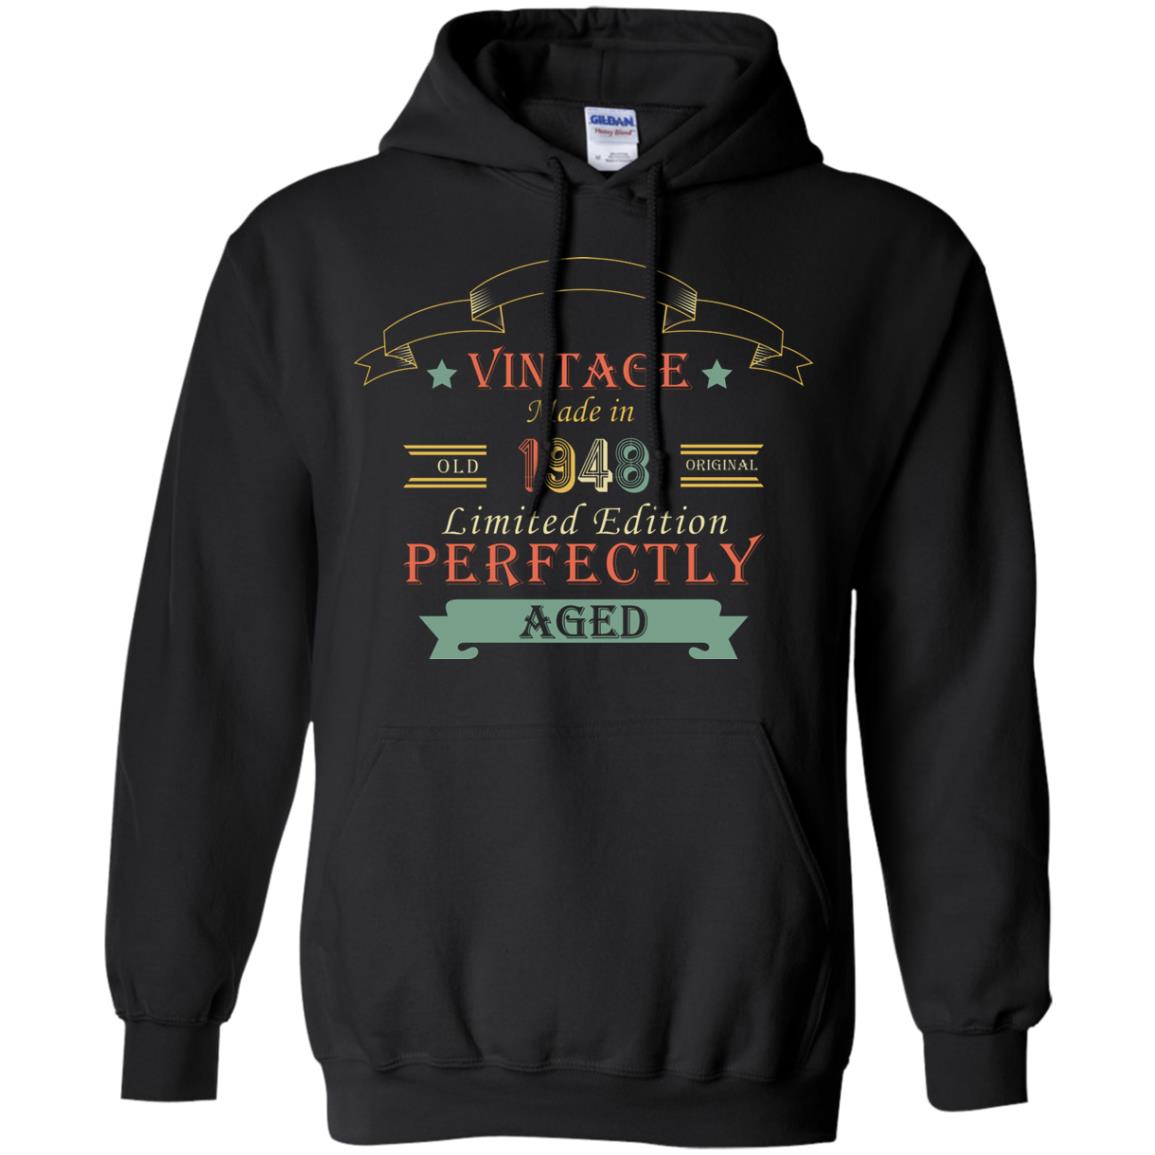 Vintage Made In Old 1948 Original Limited Edition Perfectly Aged 70th Birthday T-shirtG185 Gildan Pullover Hoodie 8 oz.